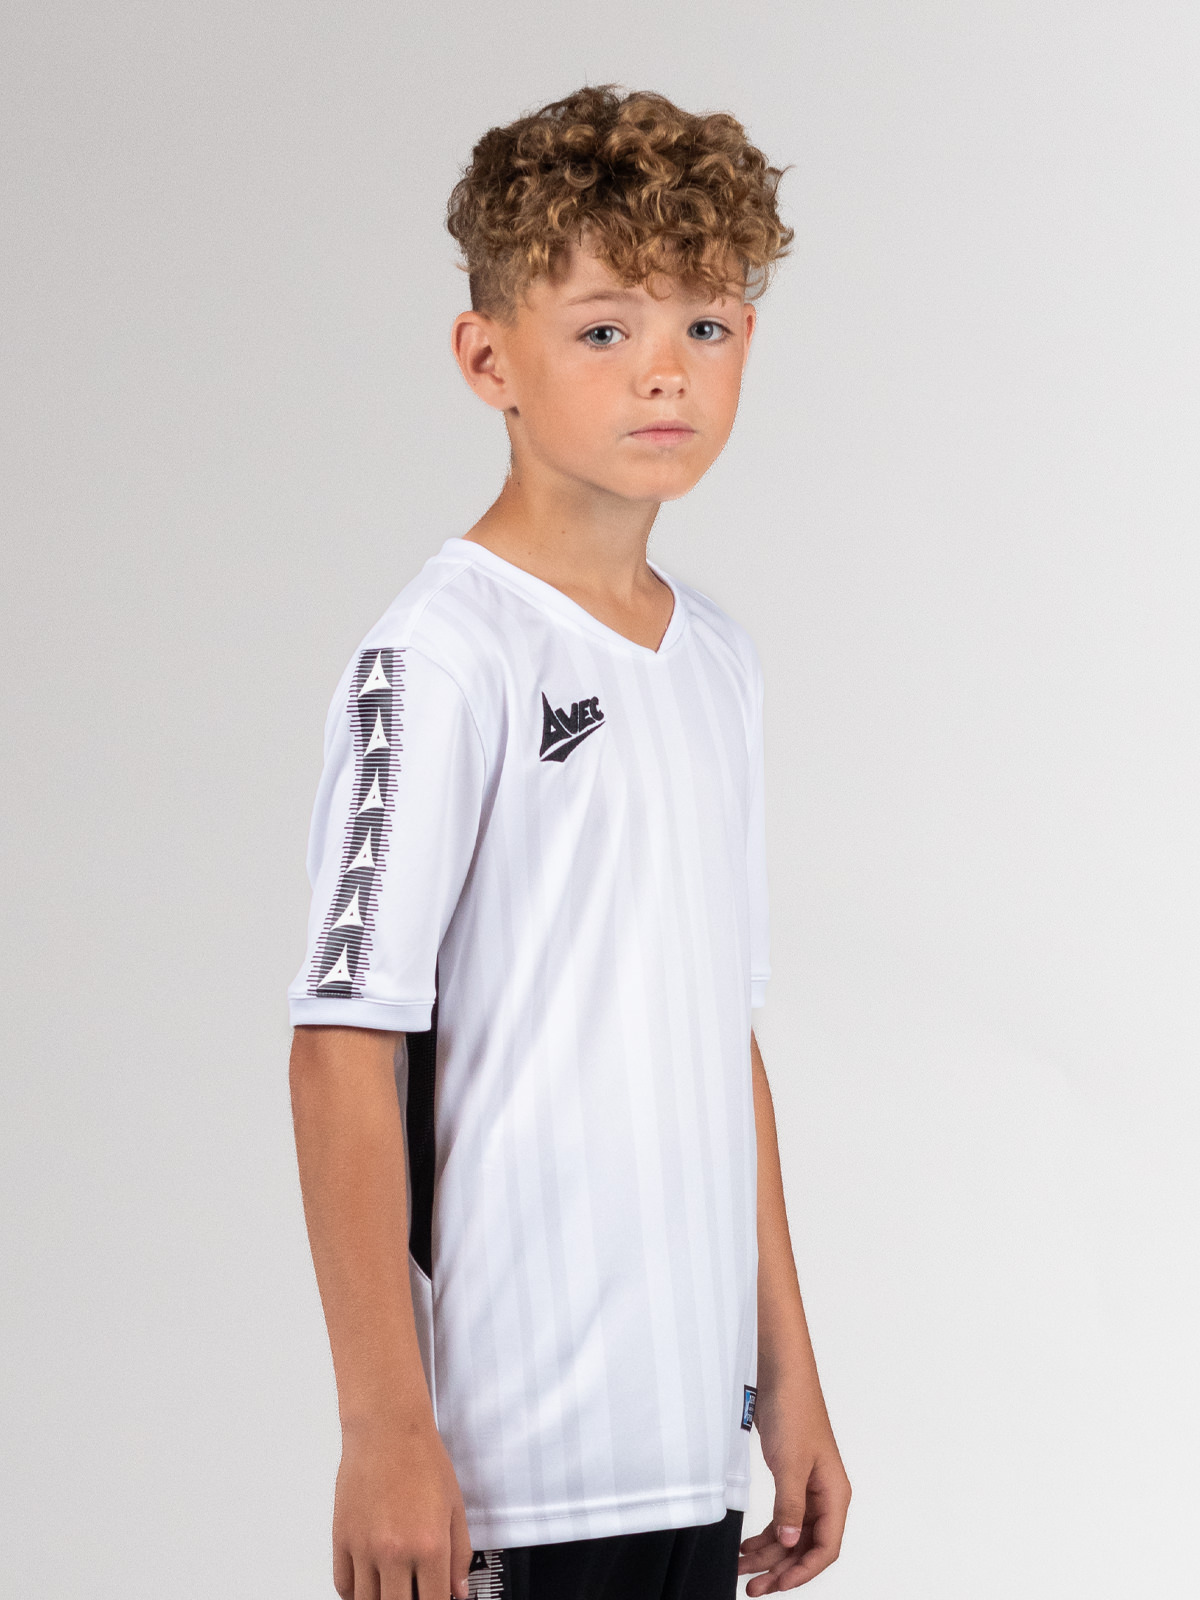 picture of shade jersey - white/black